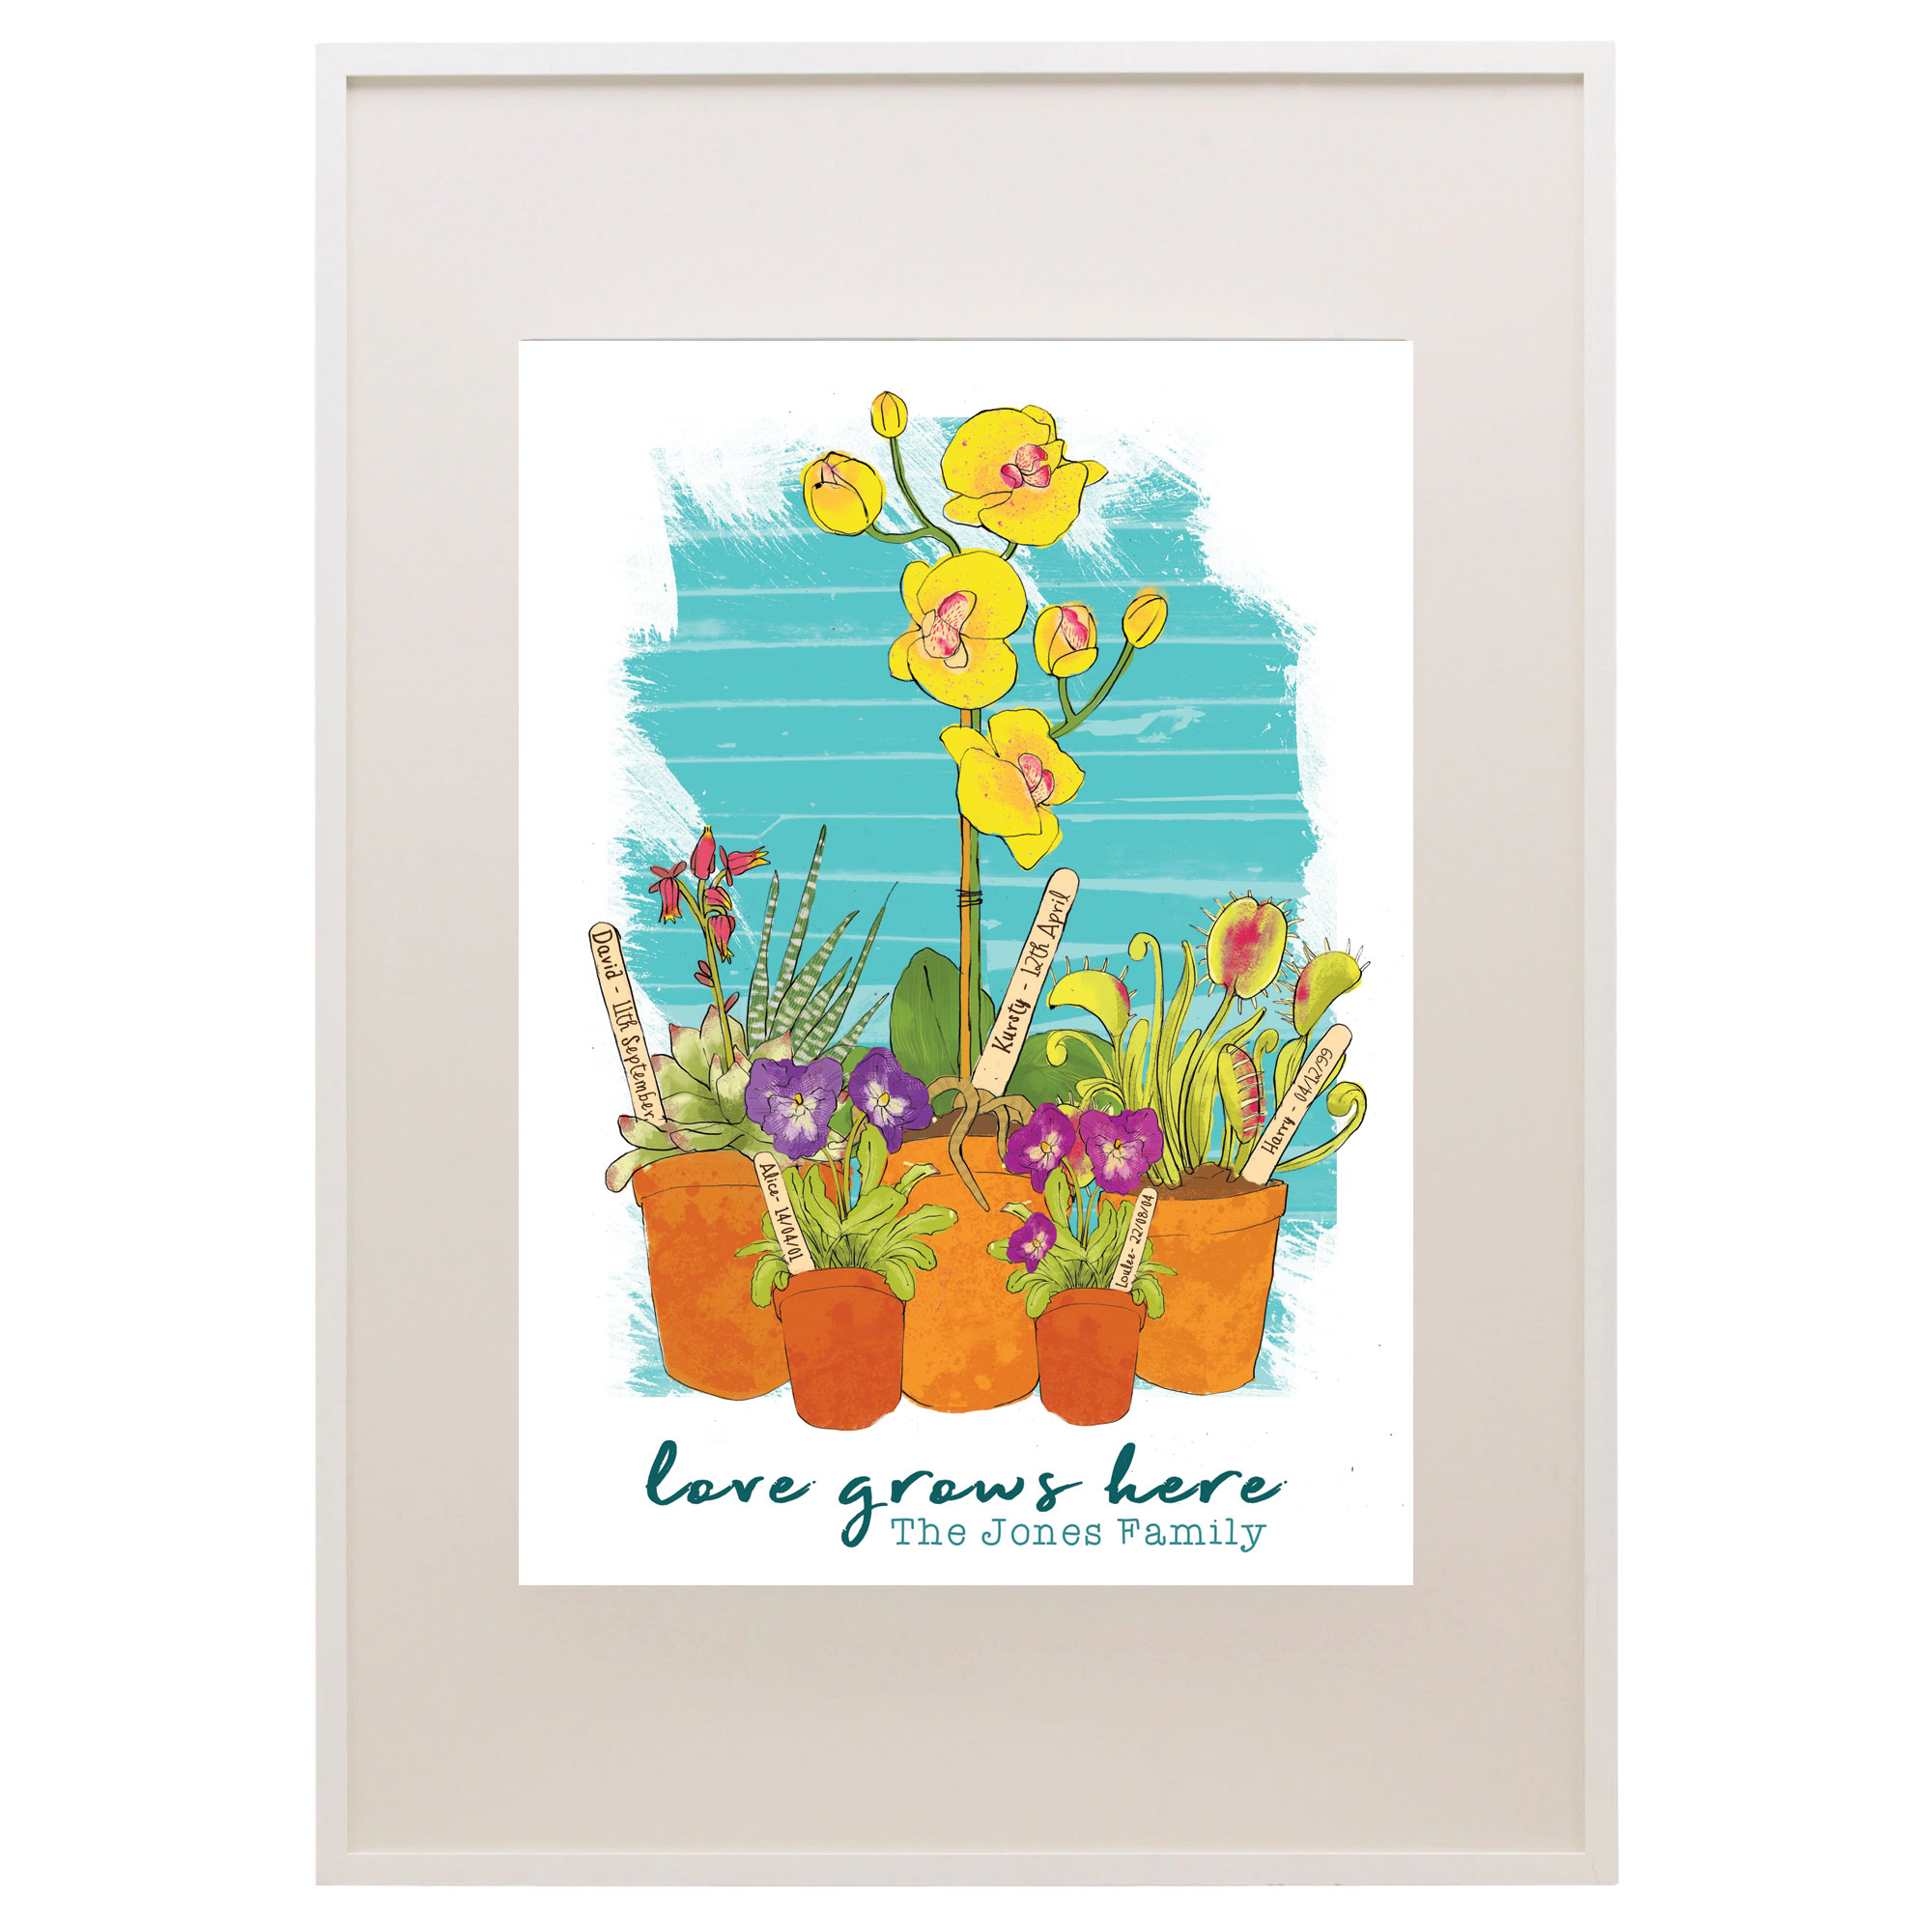 Framed Family Print - Love Grows Here by Holly Truhol